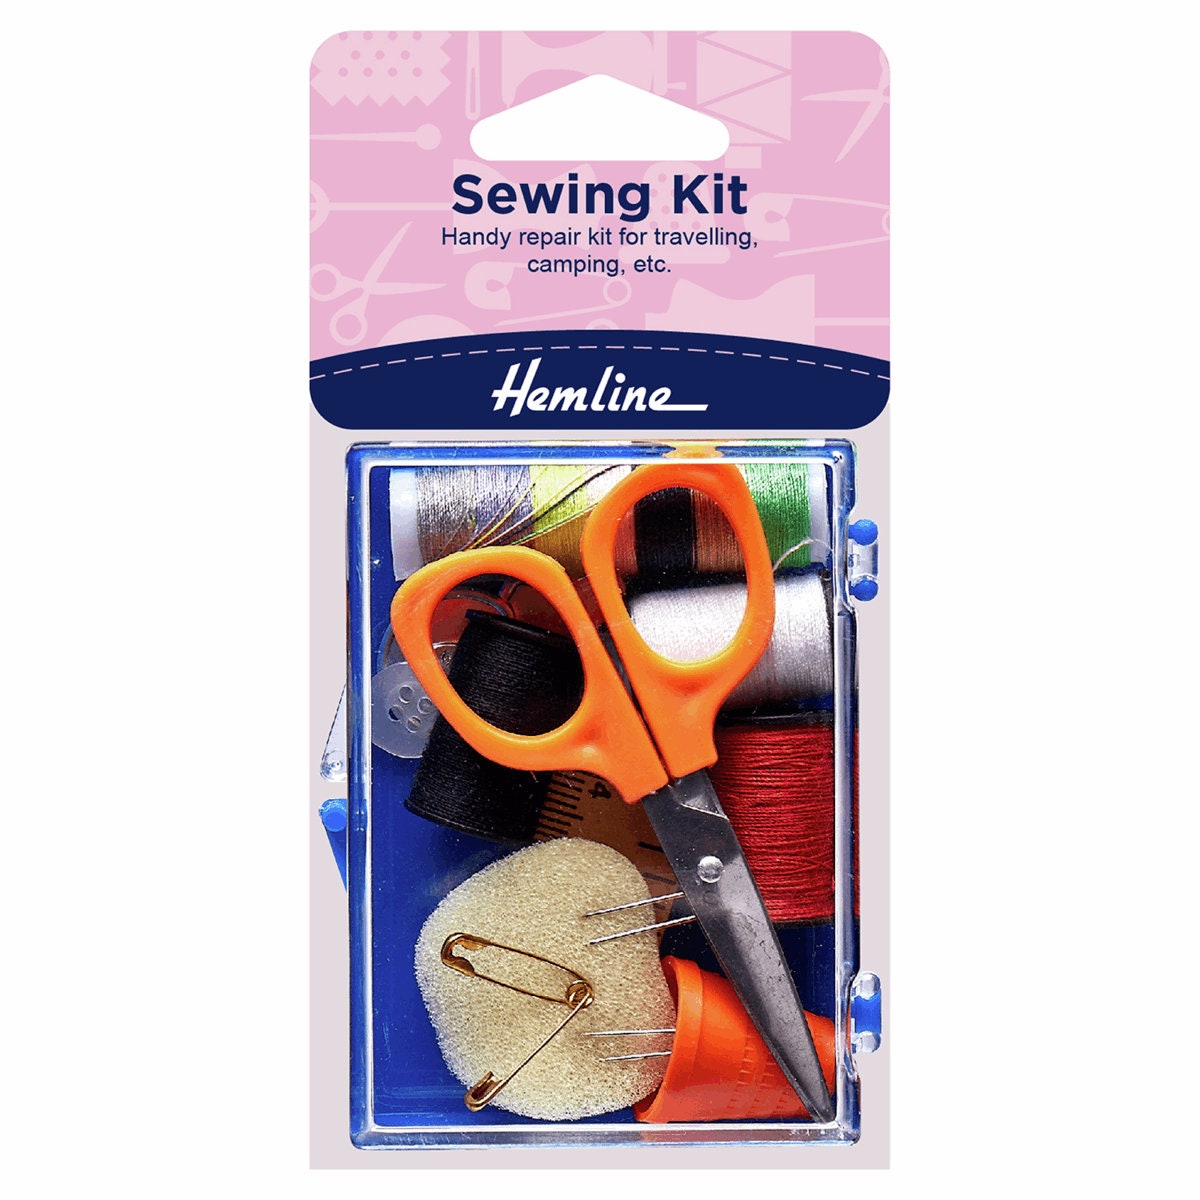 Sewing Kit. Handy repair kit. Pocket size. For car, home or office. Repair  kit. Haberdashery. Gift for him. Gift for her. Gift for student.